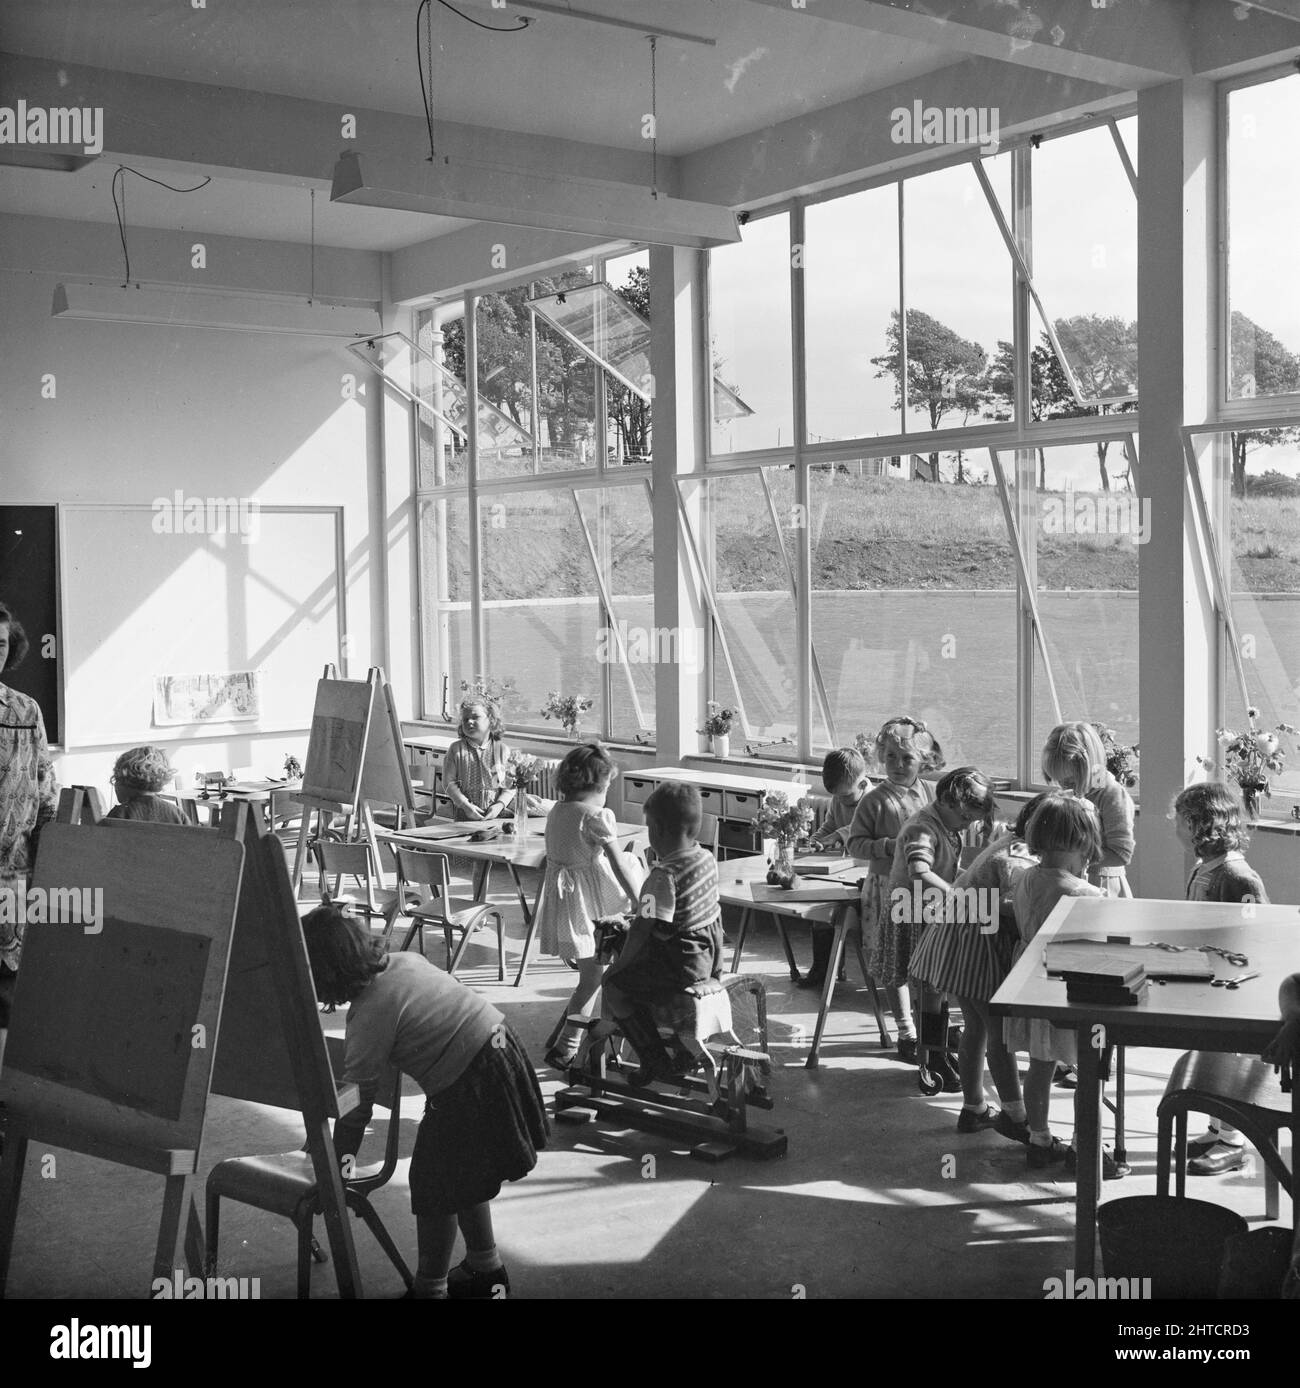 Valley Primary School, Whinlatter Road, Copeland, Cumbria, 03/09/1952. Schoolchildren engaged in various activities in a classroom at Valley Primary School. Valley Primary School was built by Laing as part of the Valley housing scheme in Whitehaven and was also one of four schools they completed in 1952 in the Carlisle and West Cumberland area. Stock Photo